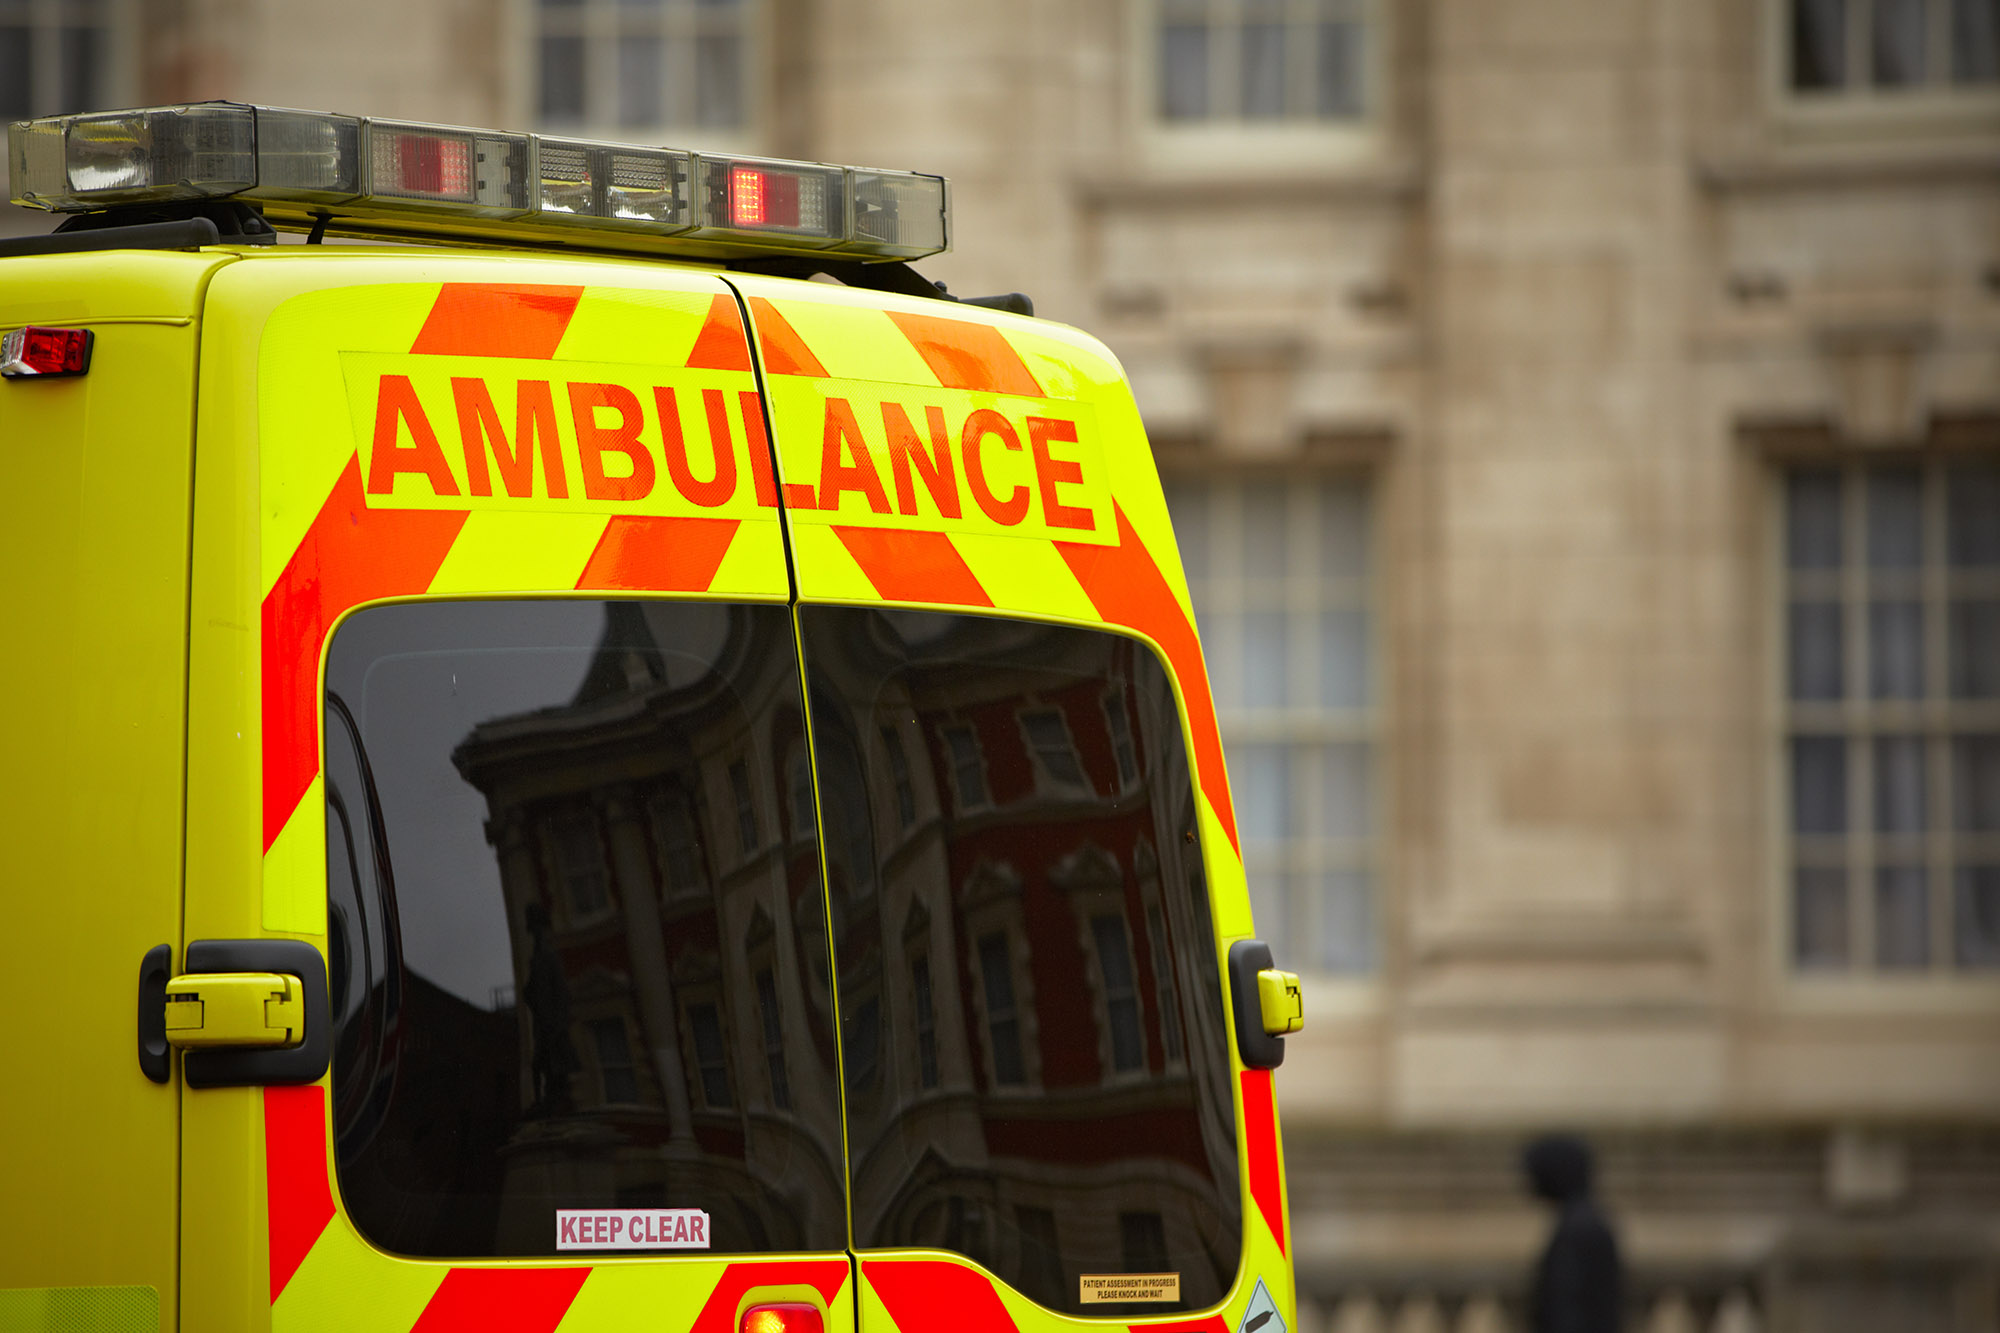 Ambulance, personal injury solicitors, accident claim managers Birmingham